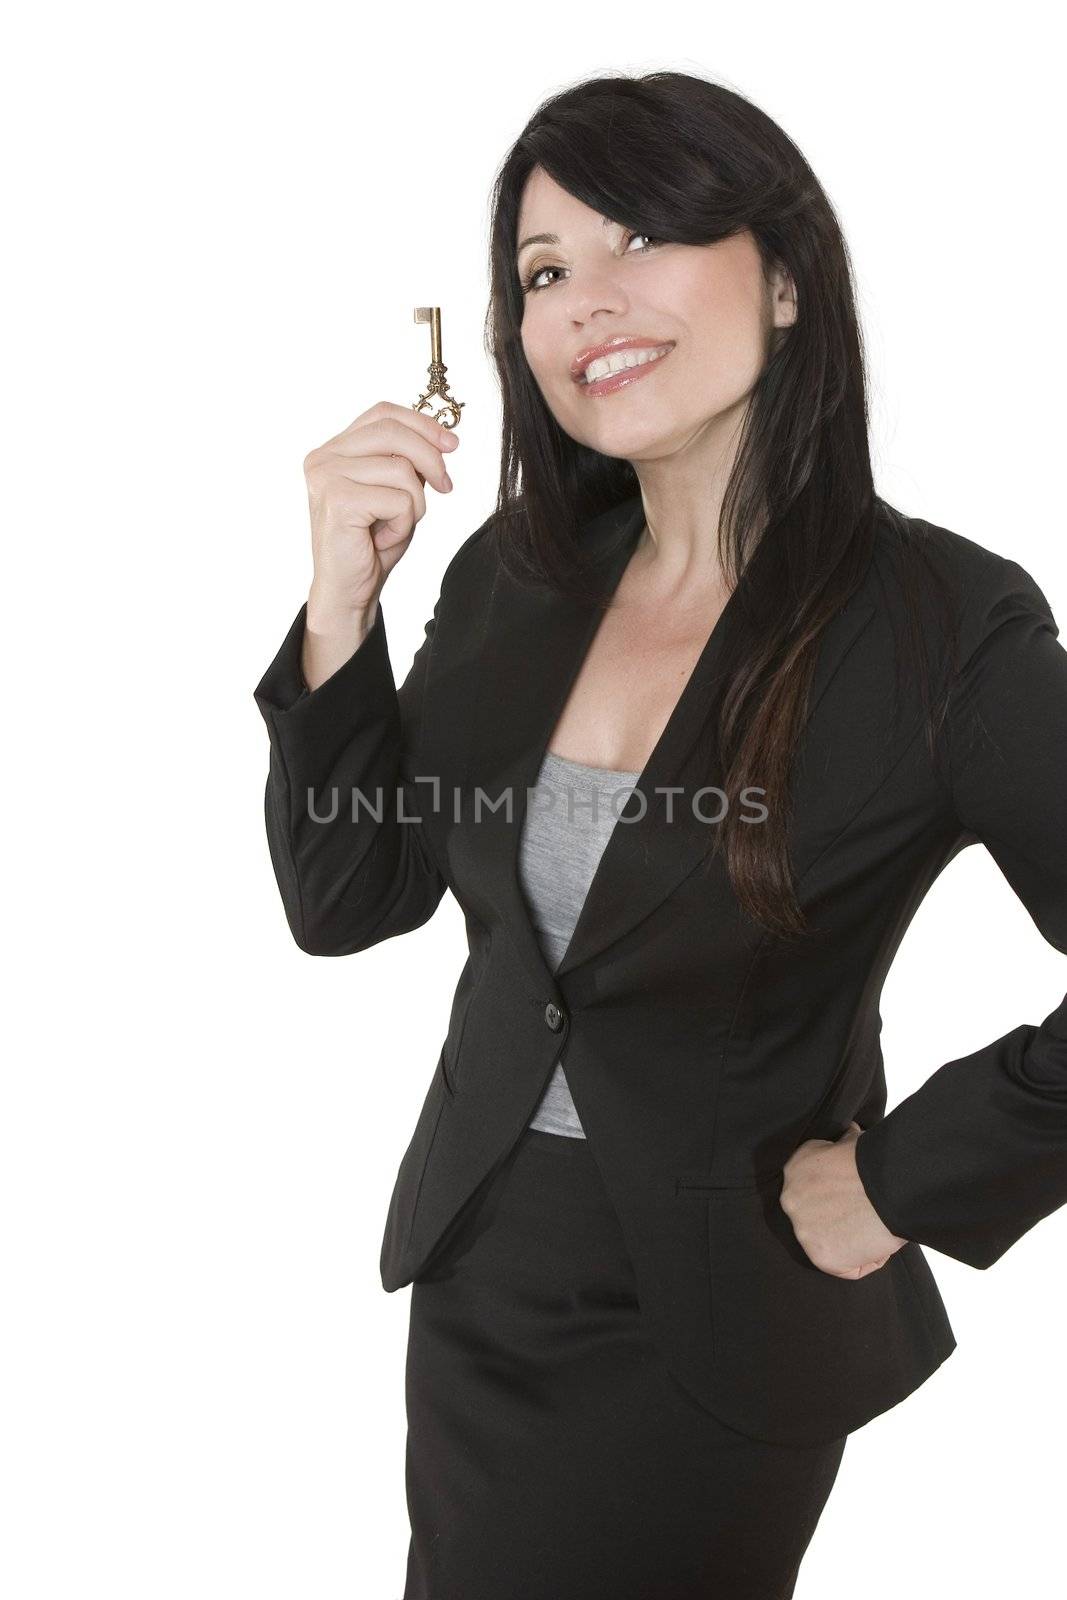 Smiling woman holding a key in her hand